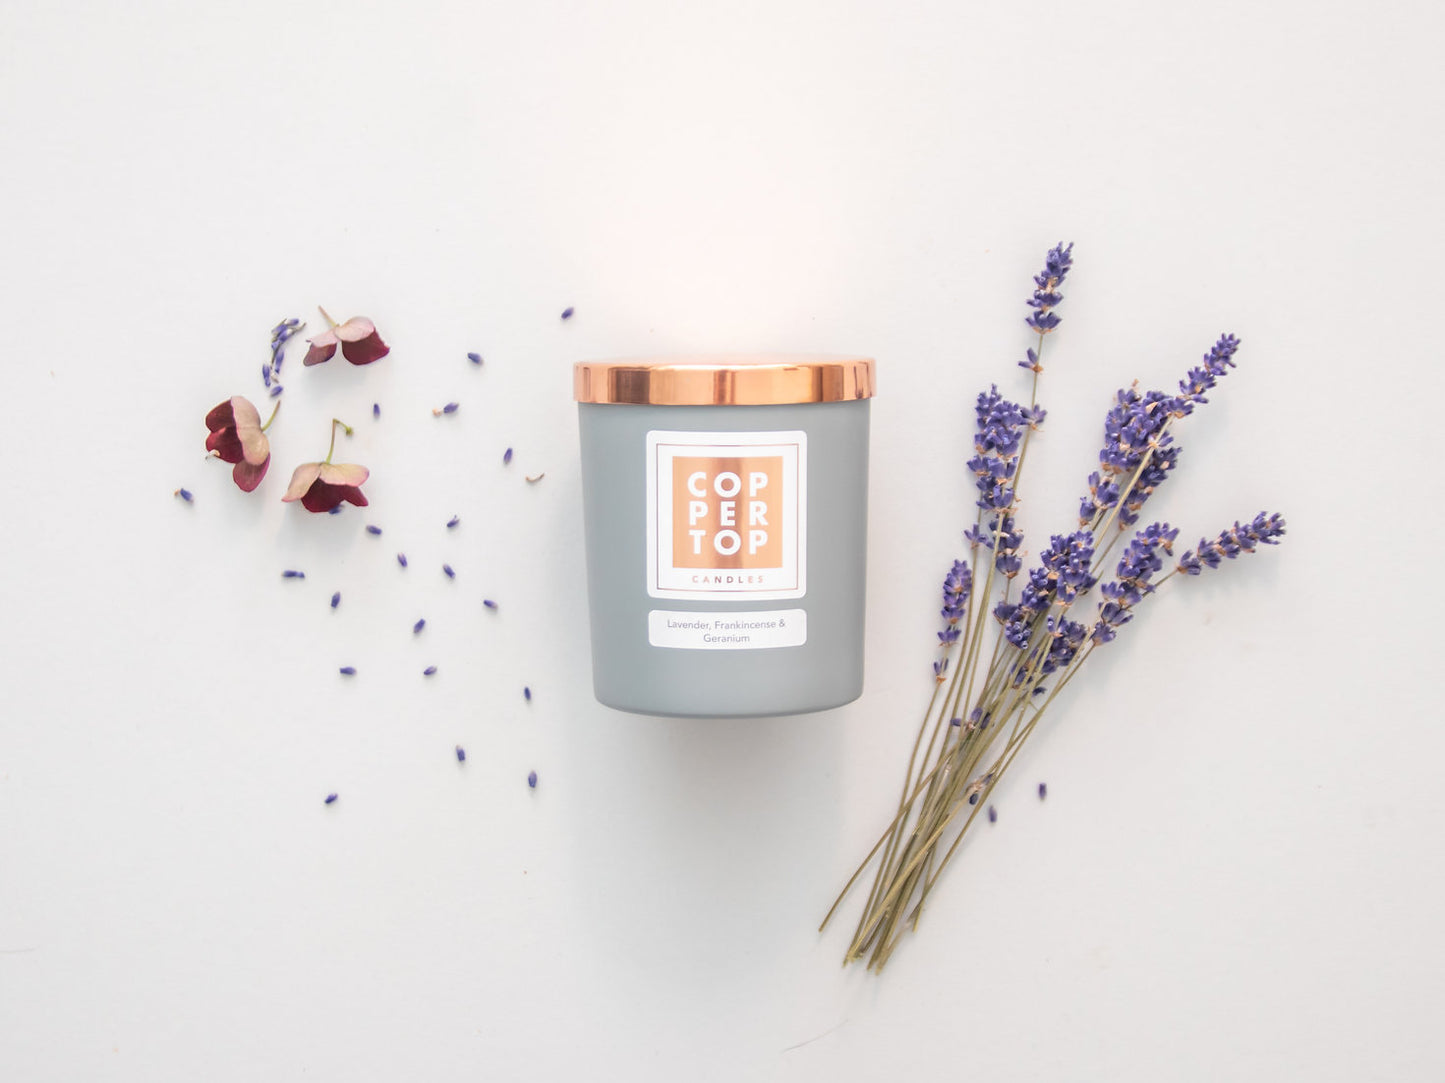 Lavender, Frankincense & Geranium Aromatherapy Soy Wax Candle